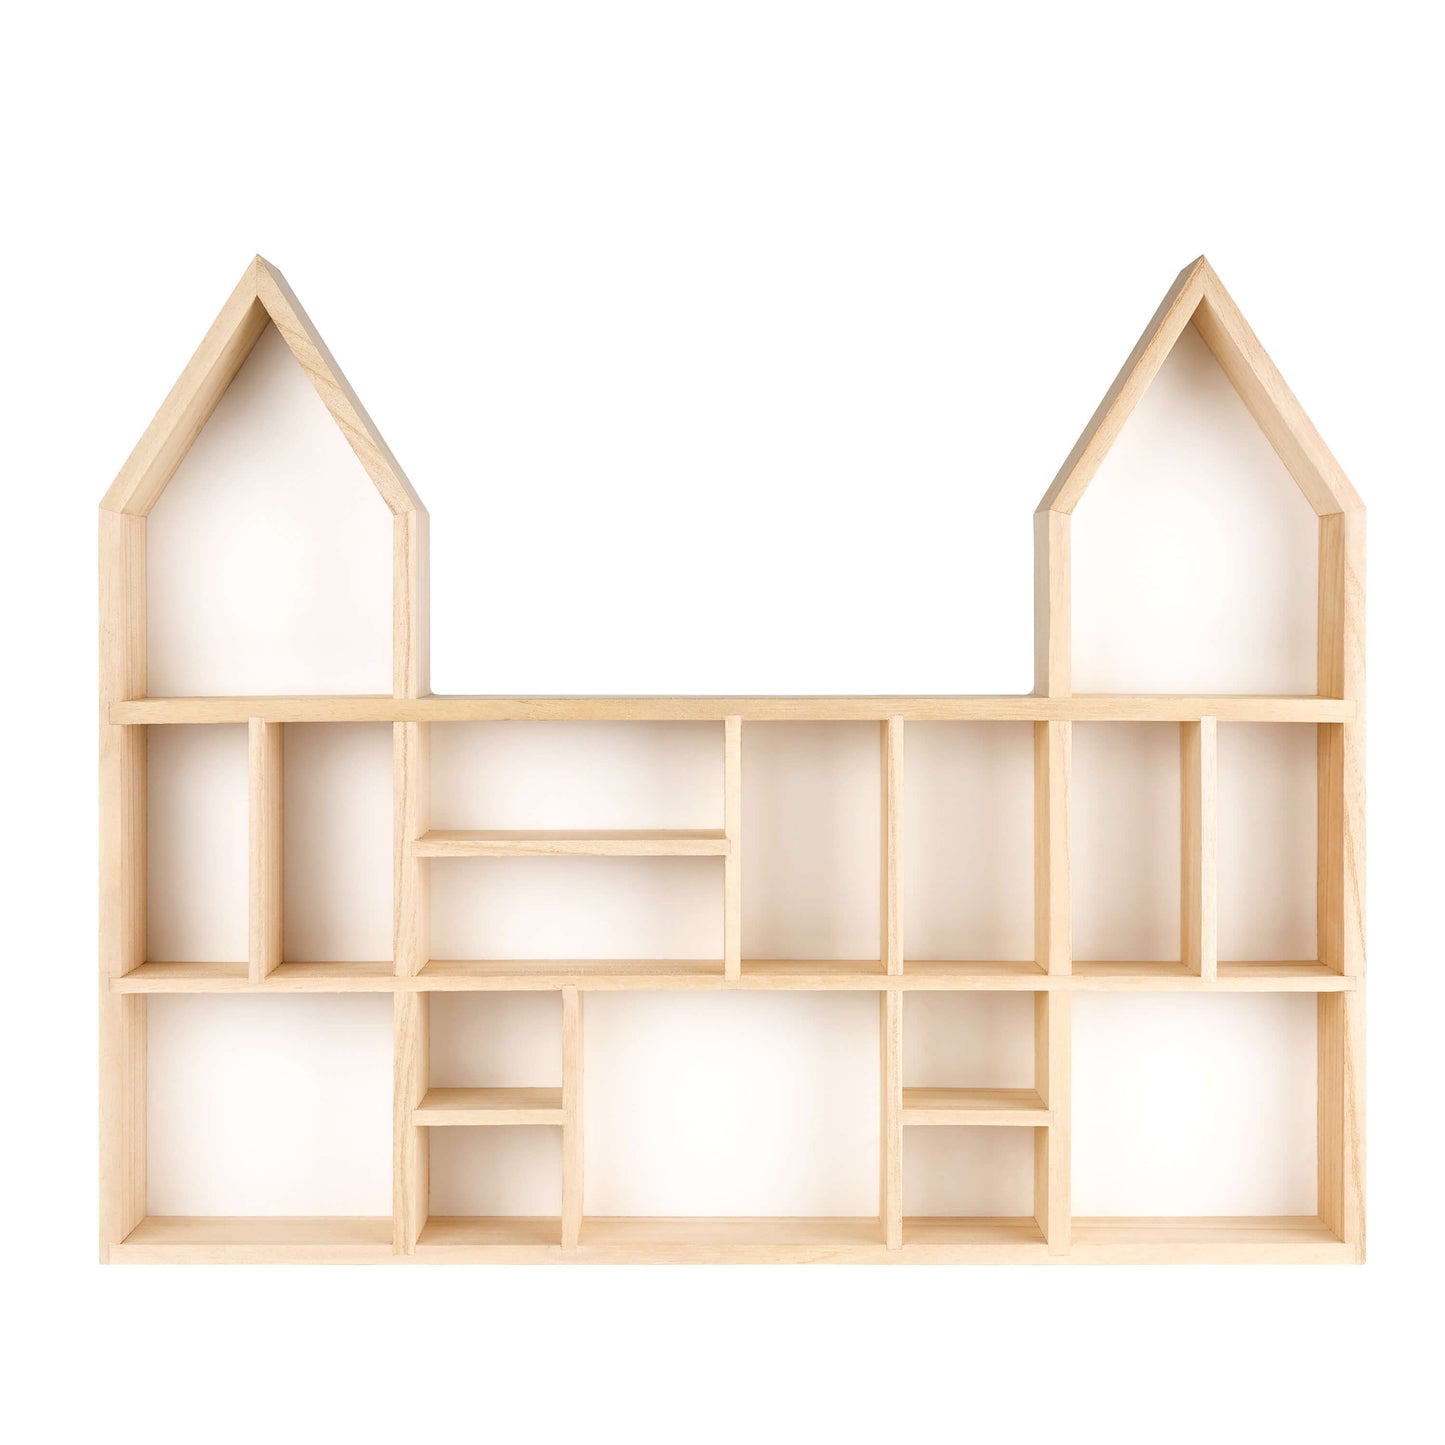 Castle shaped wooden toy display shelf with a white-colored backboard ( Empty, front view)